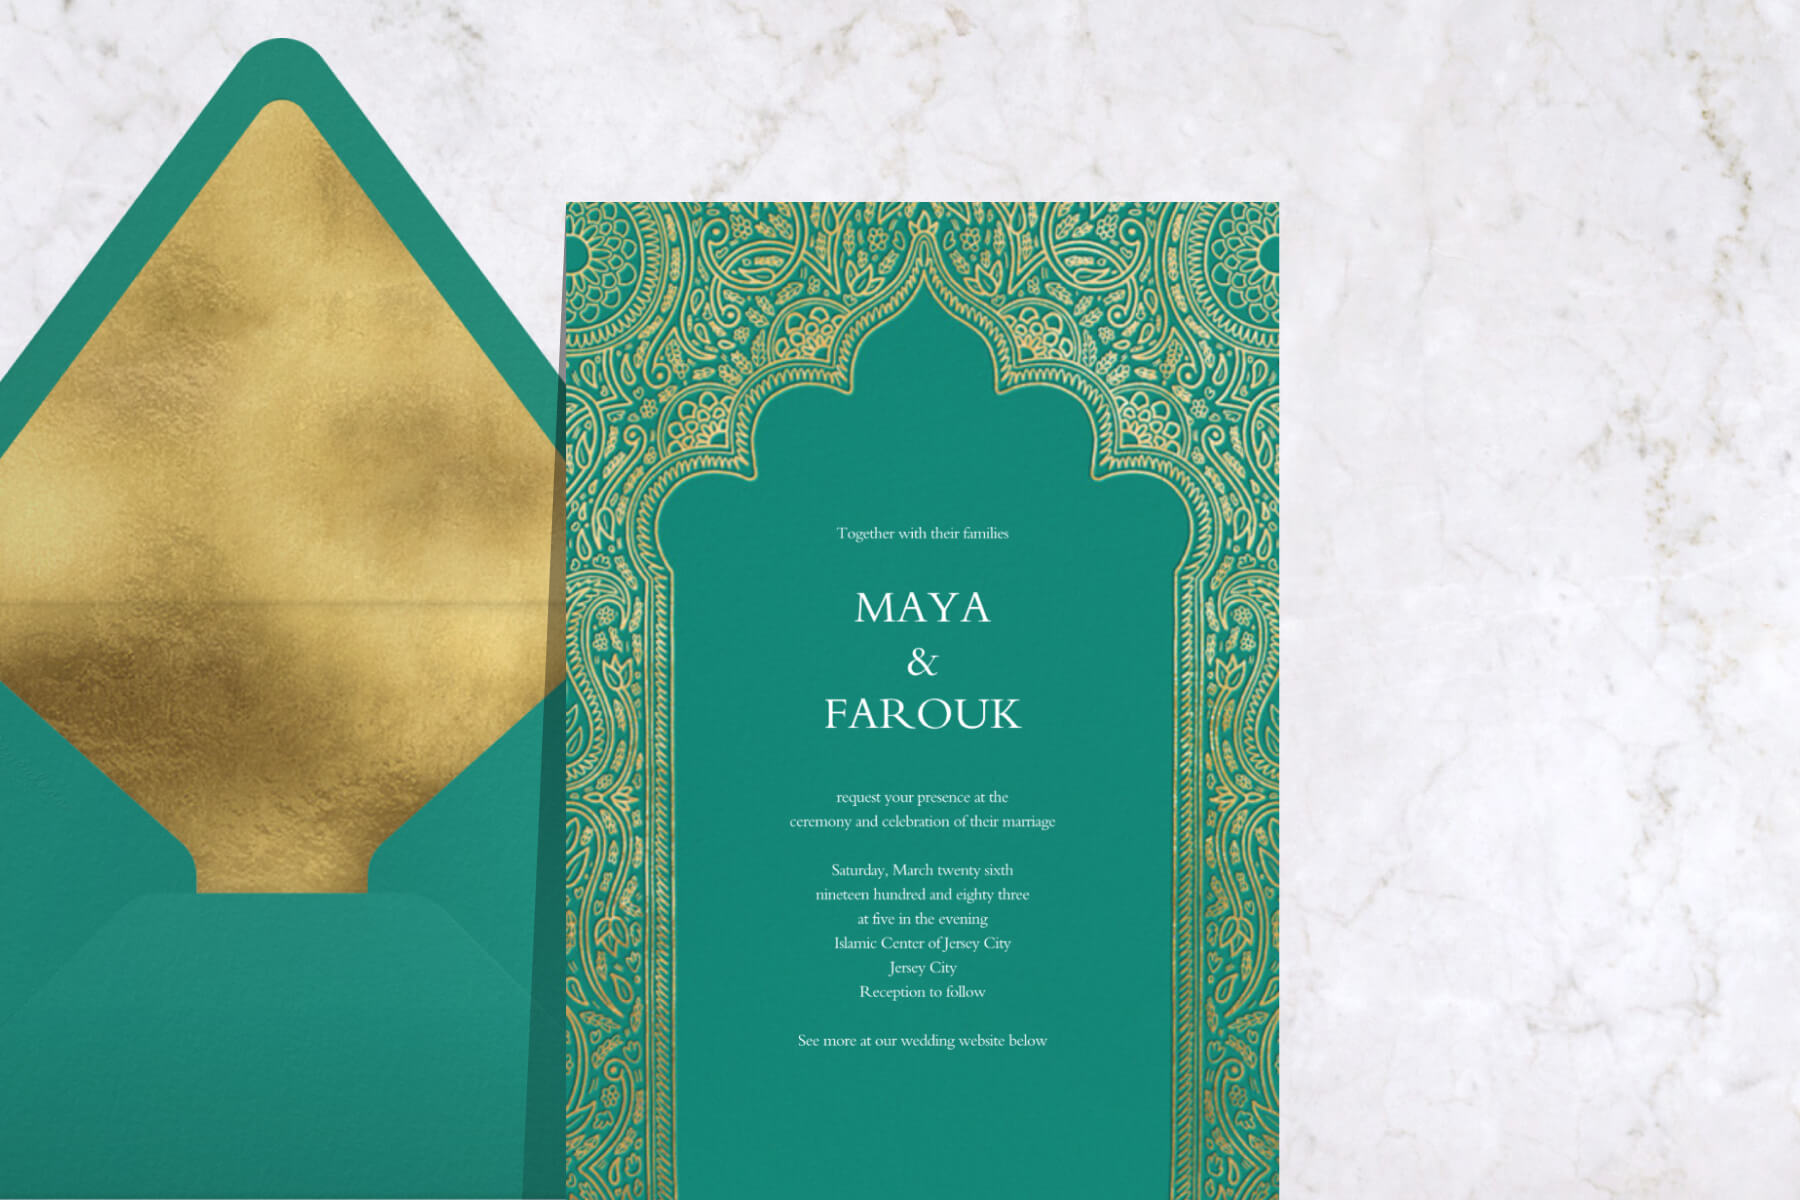 A turquoise Indian wedding invitation with an ornate gold border paired with a matching envelope.